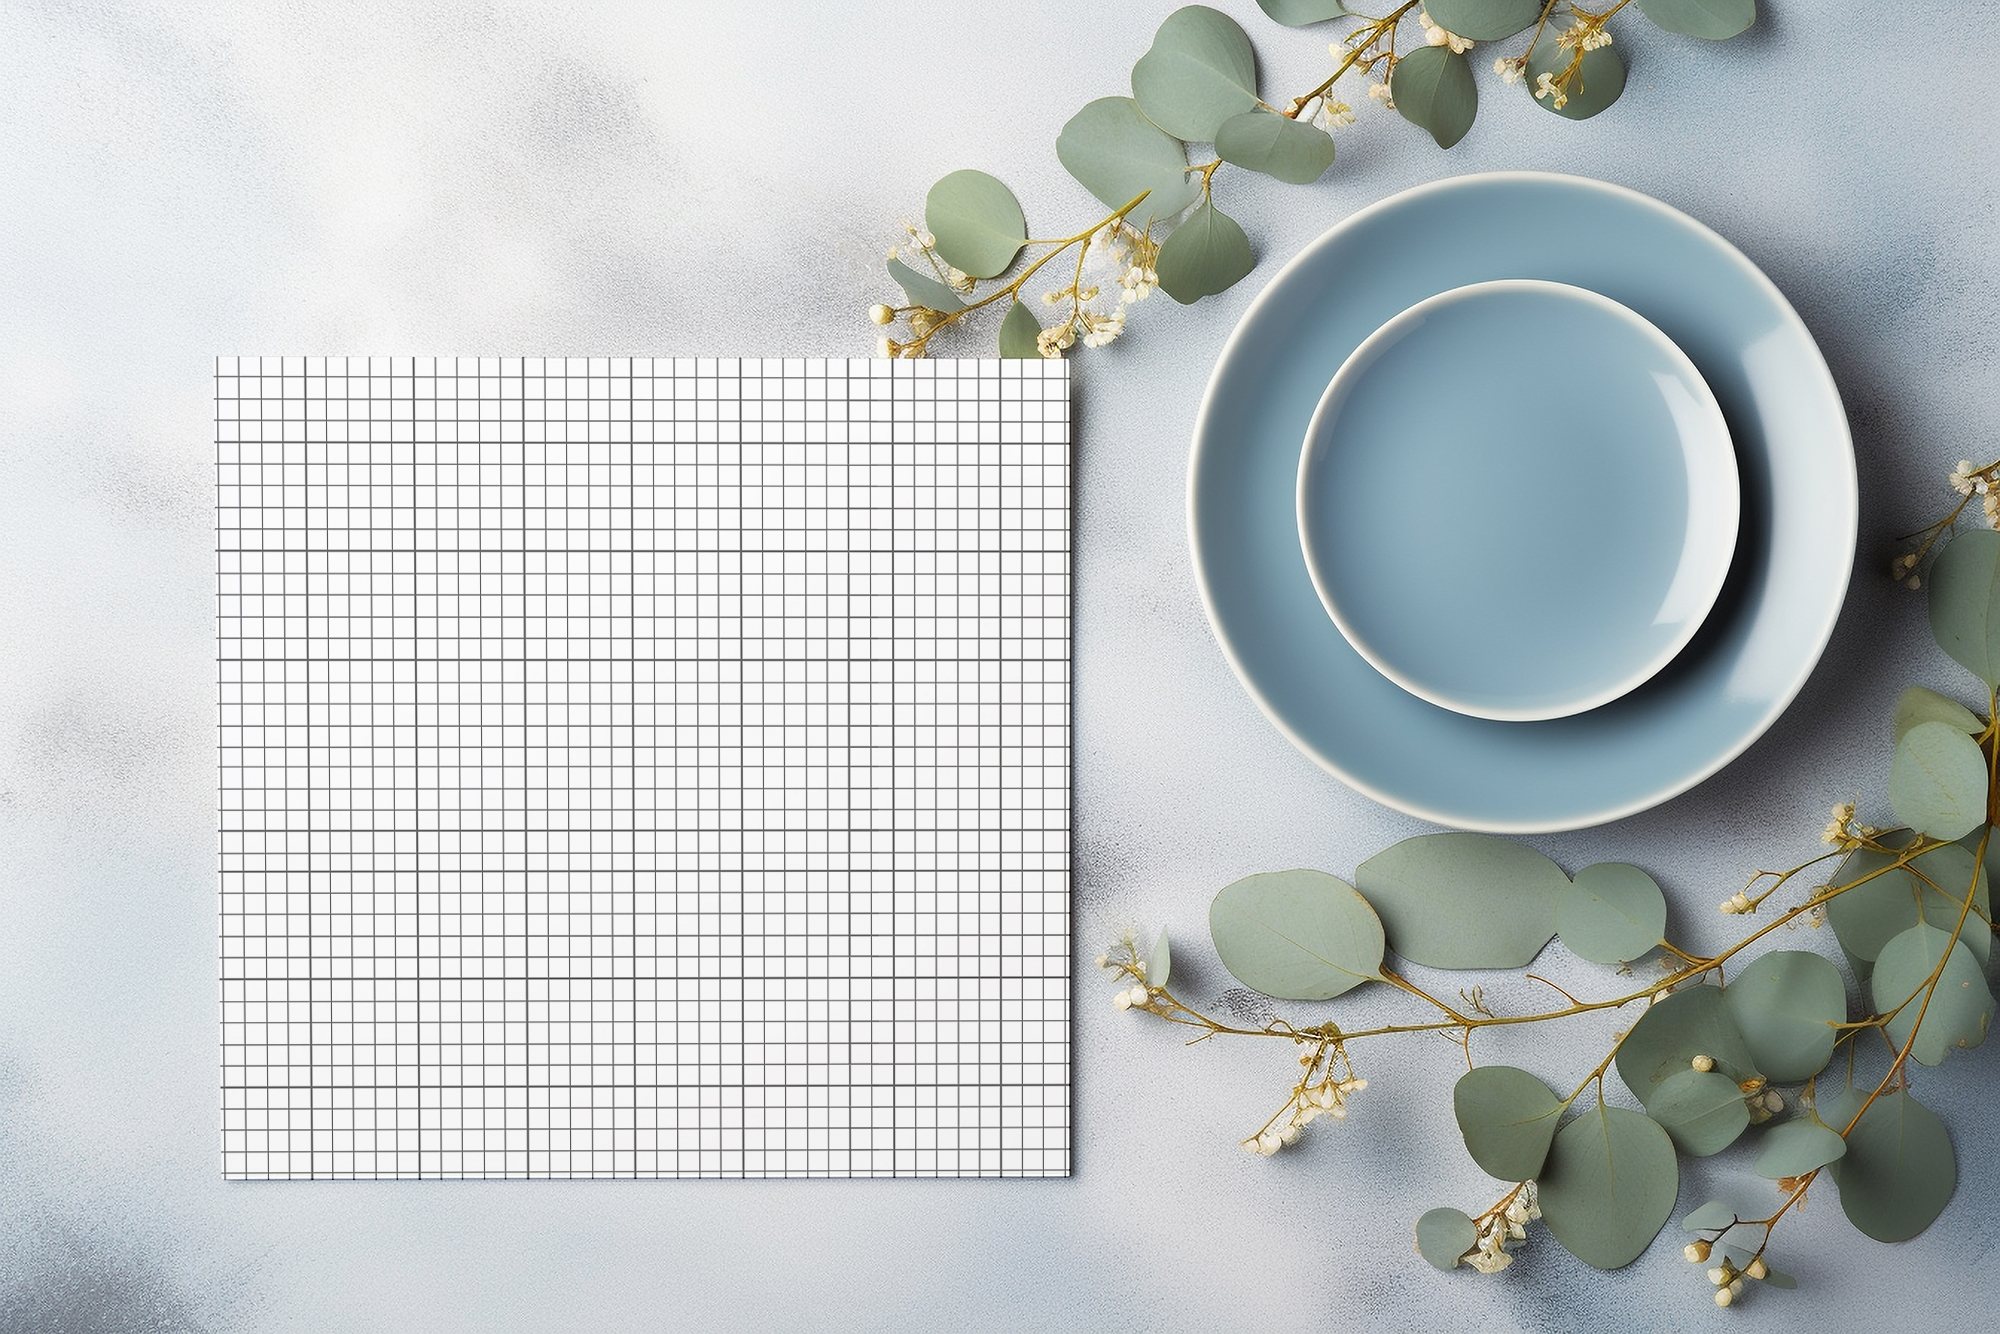 Free Download Square Paper Mockup with Ceramic Plates grid